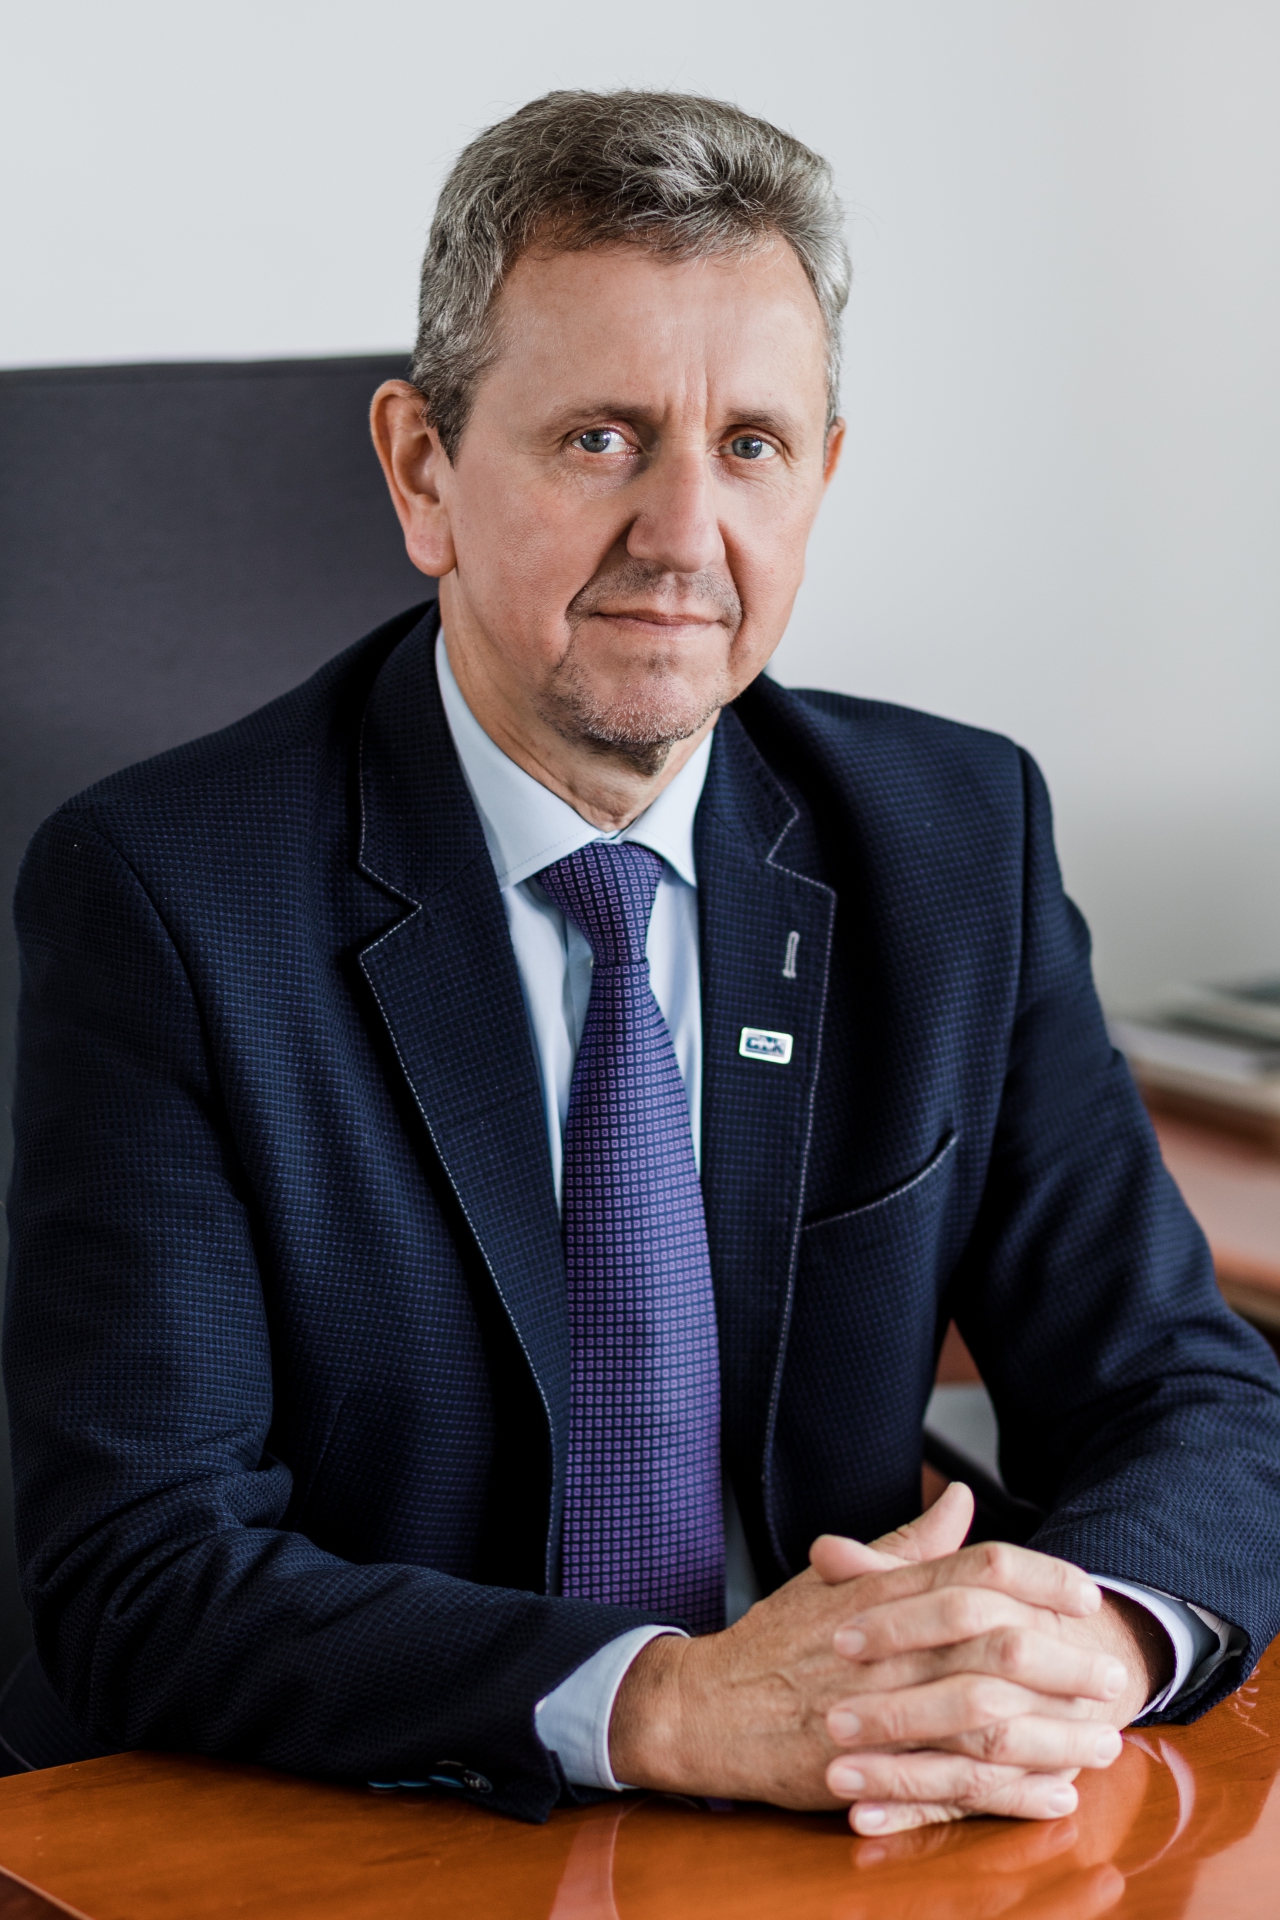 Jerzy Gazda - Member of the Board, Chief Financial Officer